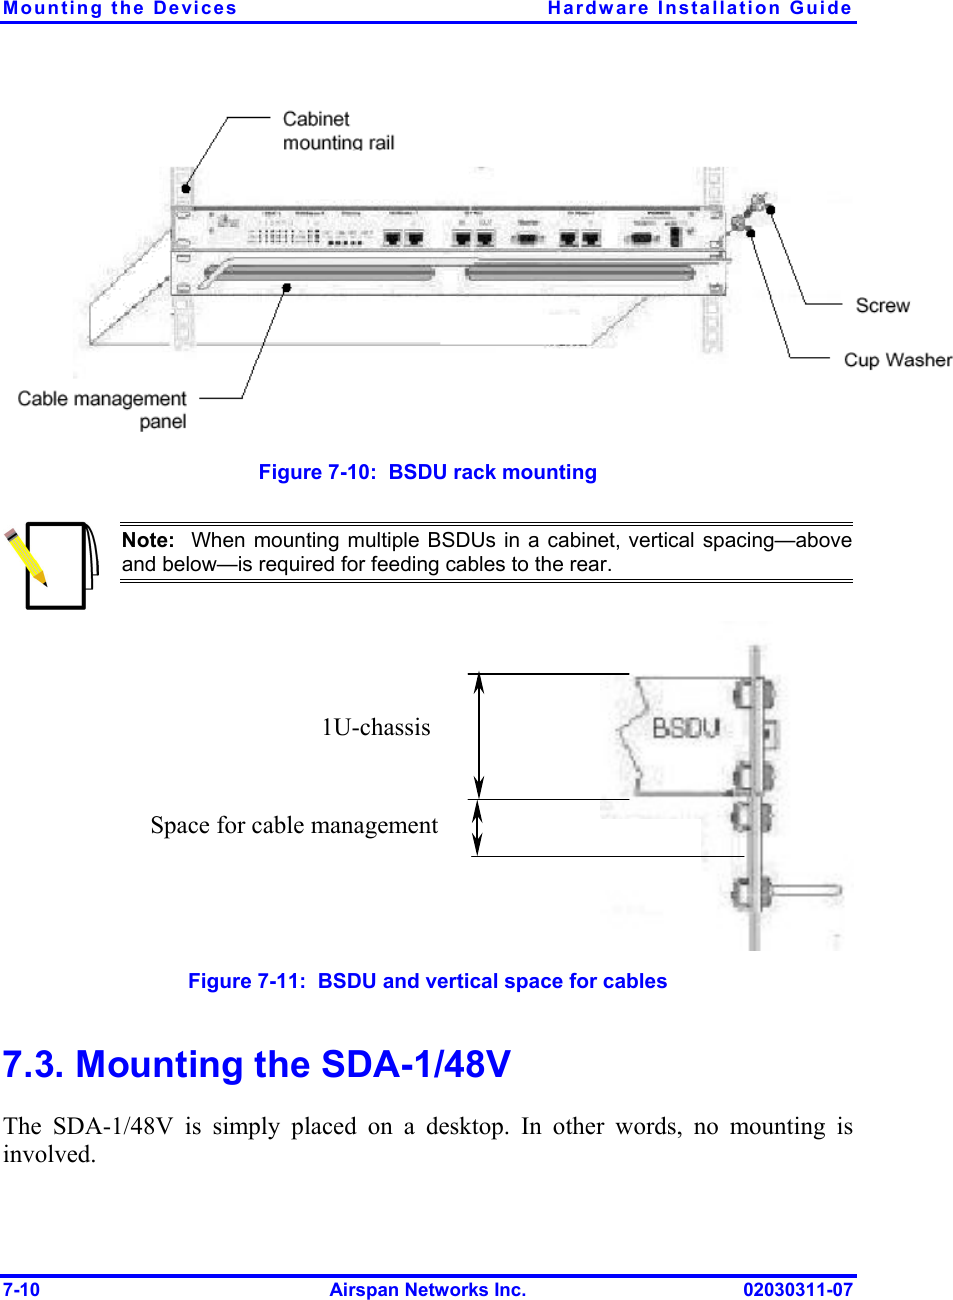 Mounting the Devices  Hardware Installation Guide 7-10  Airspan Networks Inc.  02030311-07   Figure  7-10:  BSDU rack mounting  Note:  When mounting multiple BSDUs in a cabinet, vertical spacing—above and below—is required for feeding cables to the rear.  Figure  7-11:  BSDU and vertical space for cables 7.3. Mounting the SDA-1/48V The SDA-1/48V is simply placed on a desktop. In other words, no mounting is involved. Space for cable management   1U-chassis 